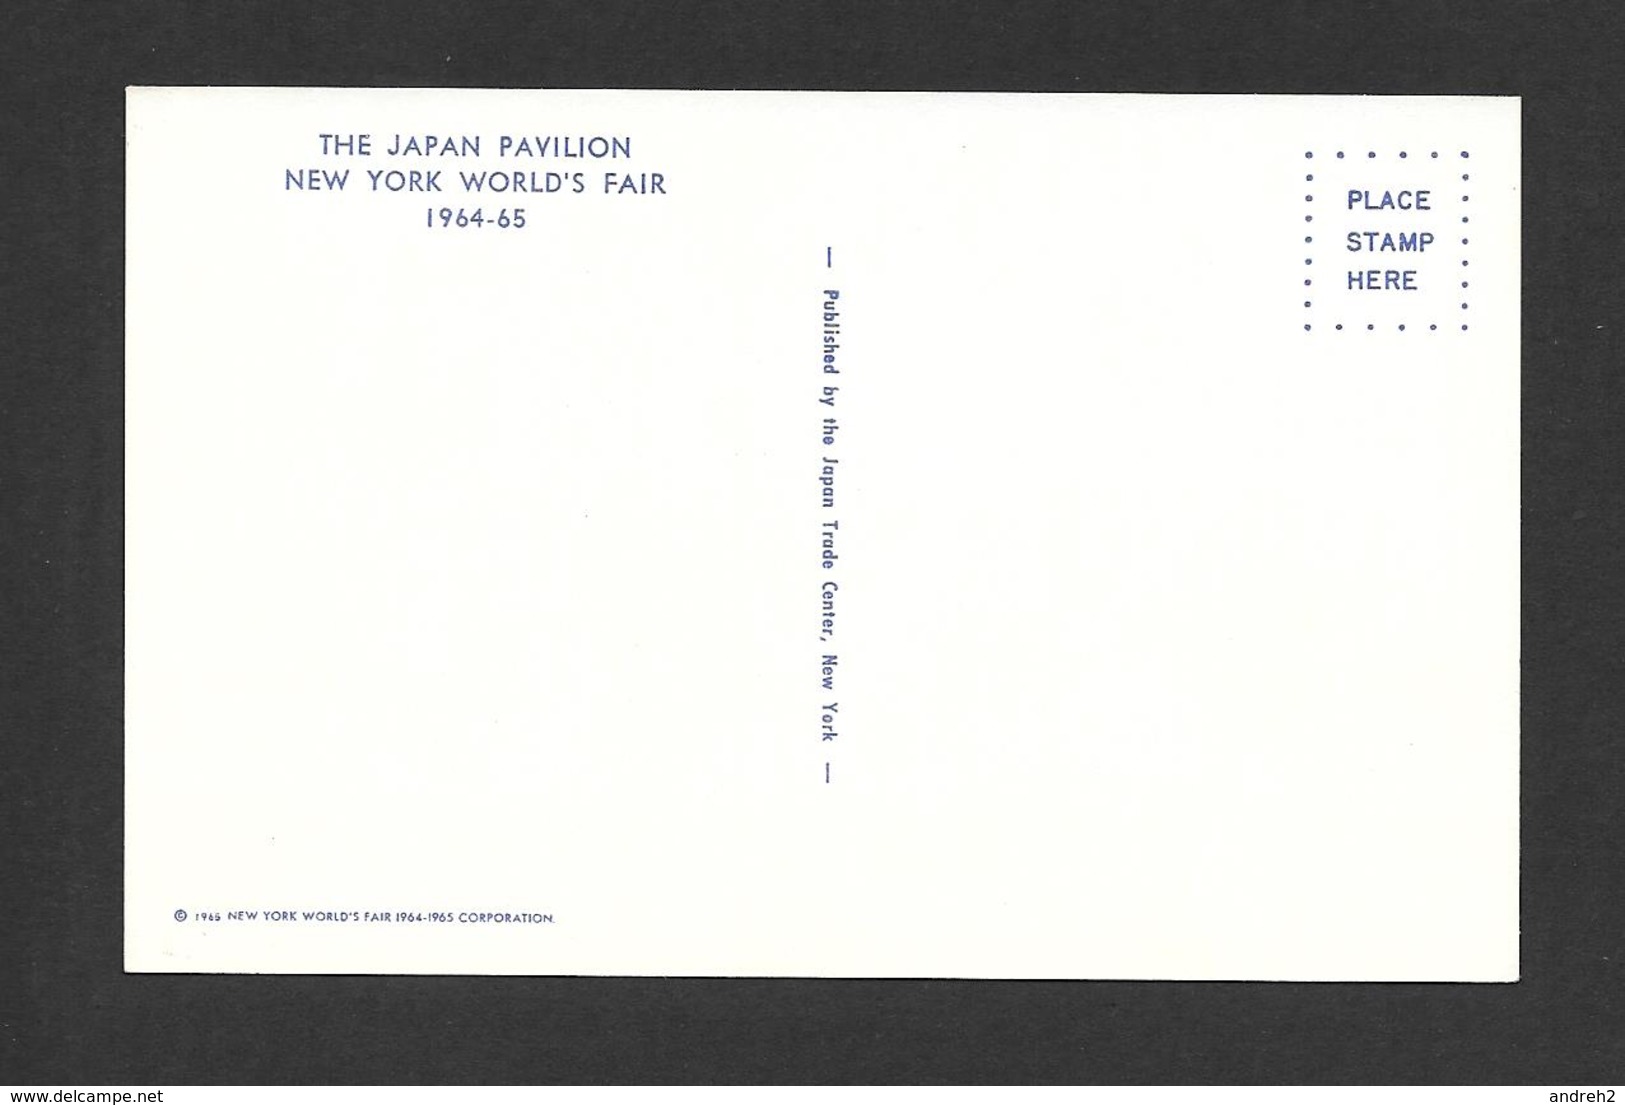 EXPOSITIONS - NEW YORK WORLD'S FAIR 1964-65 - THE JAPAN PAVILION - BY JAPAN TRADE CENTER - Expositions